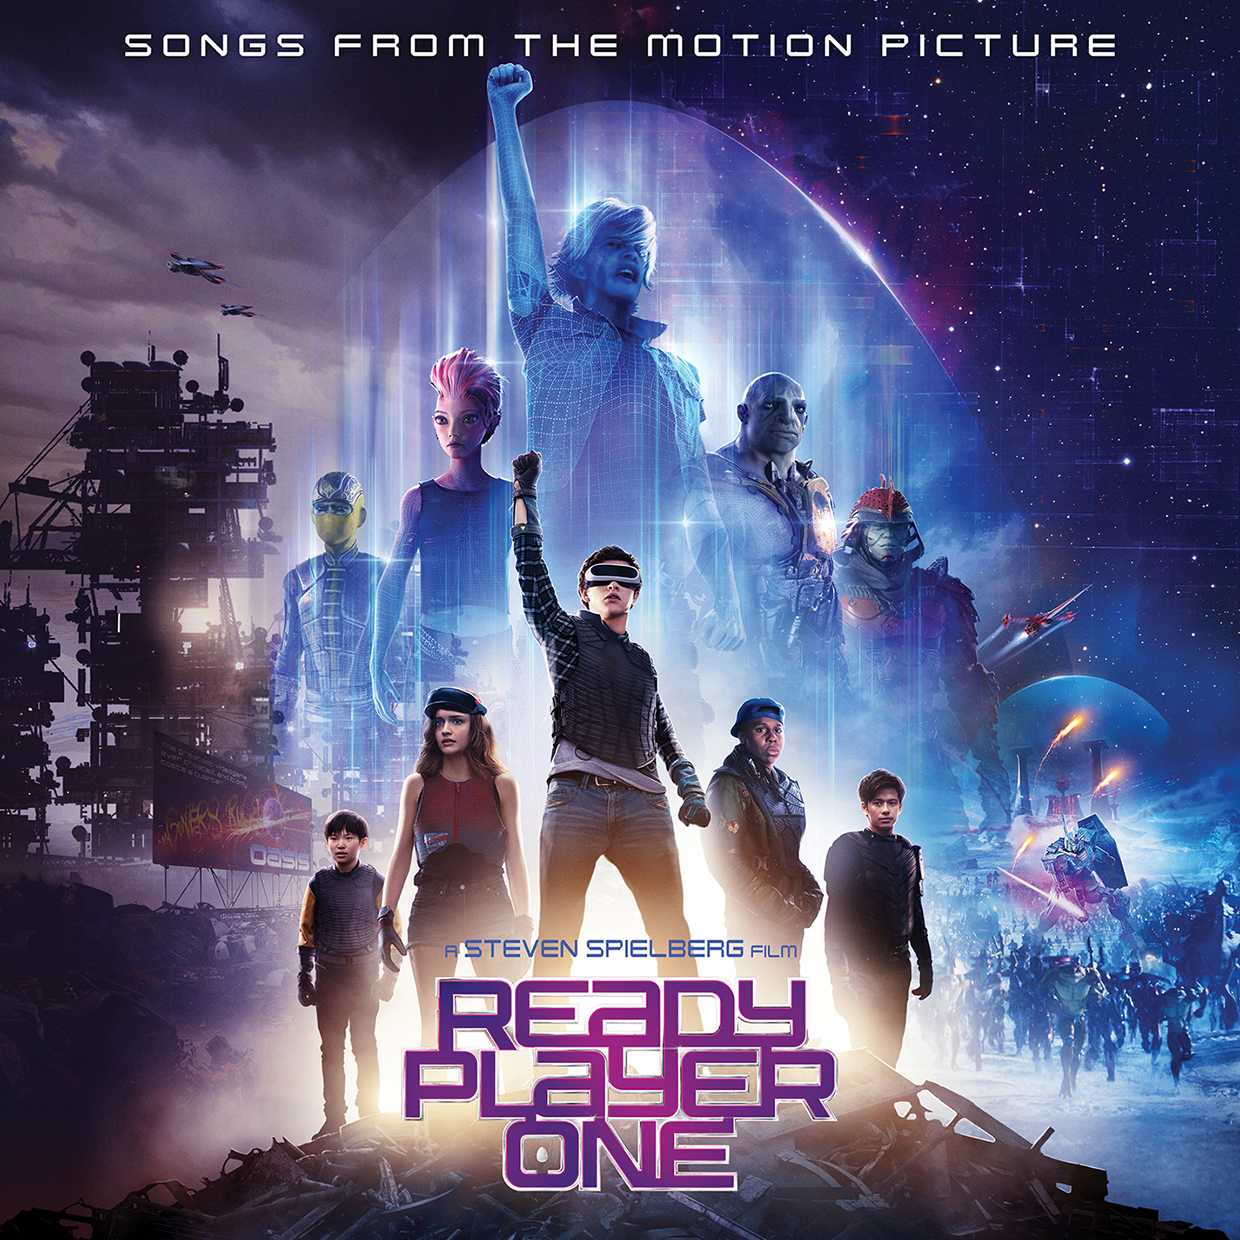 CD Shop - SOUNDTRACK READY PLAYER ONE:SONGS